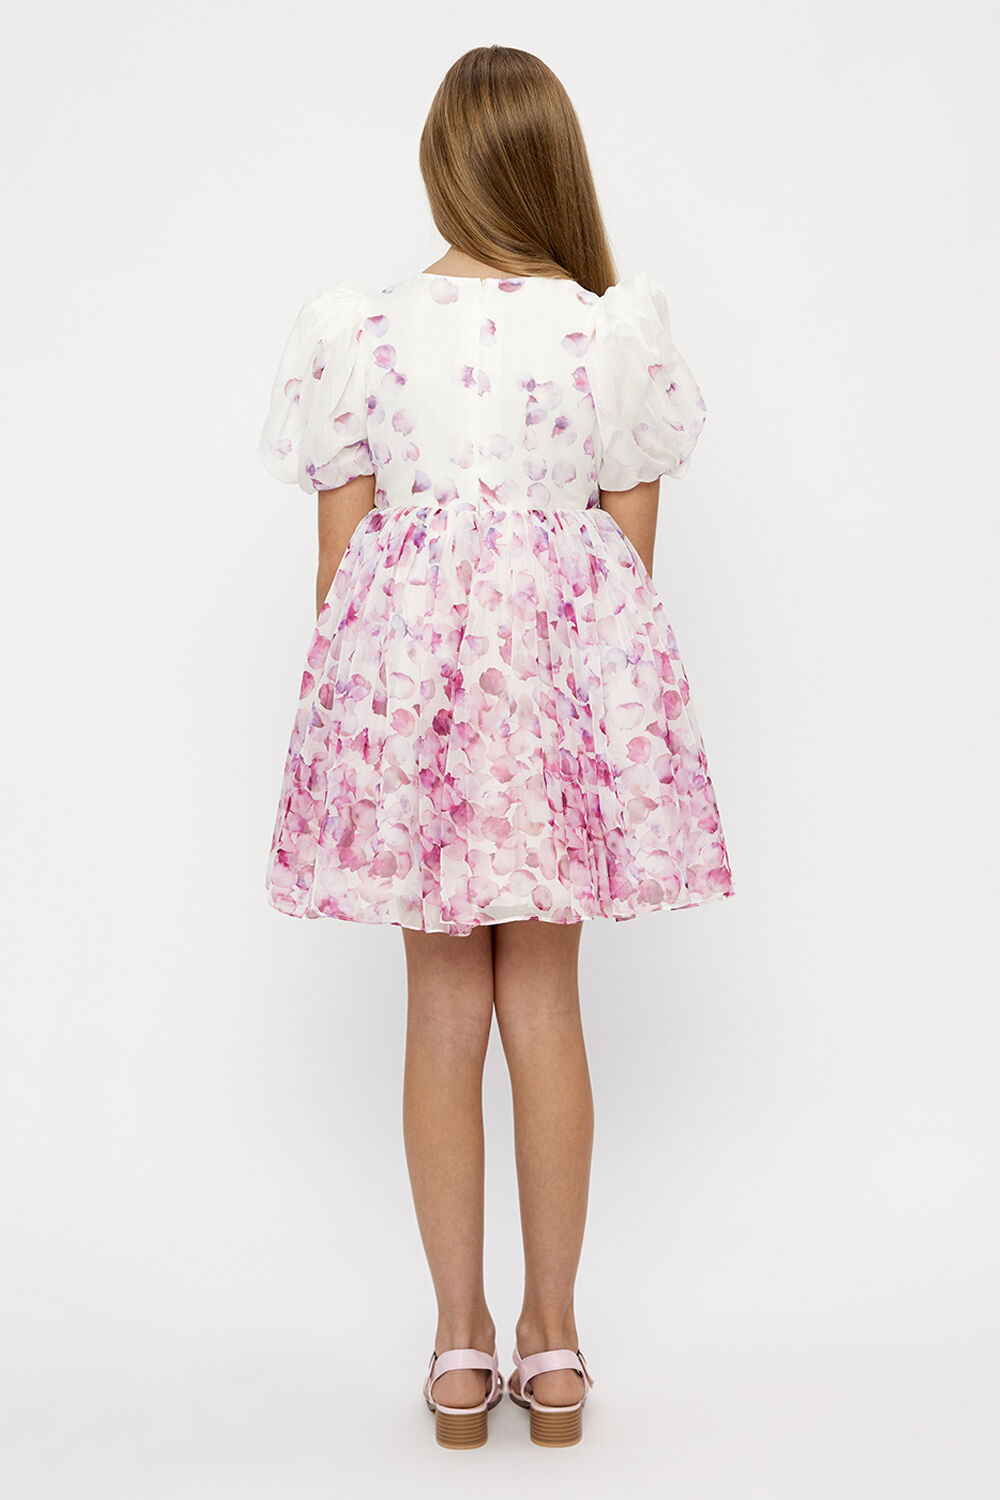 GIRLS HALEY PUFF MINI DRESS in colour PINK CARNATION